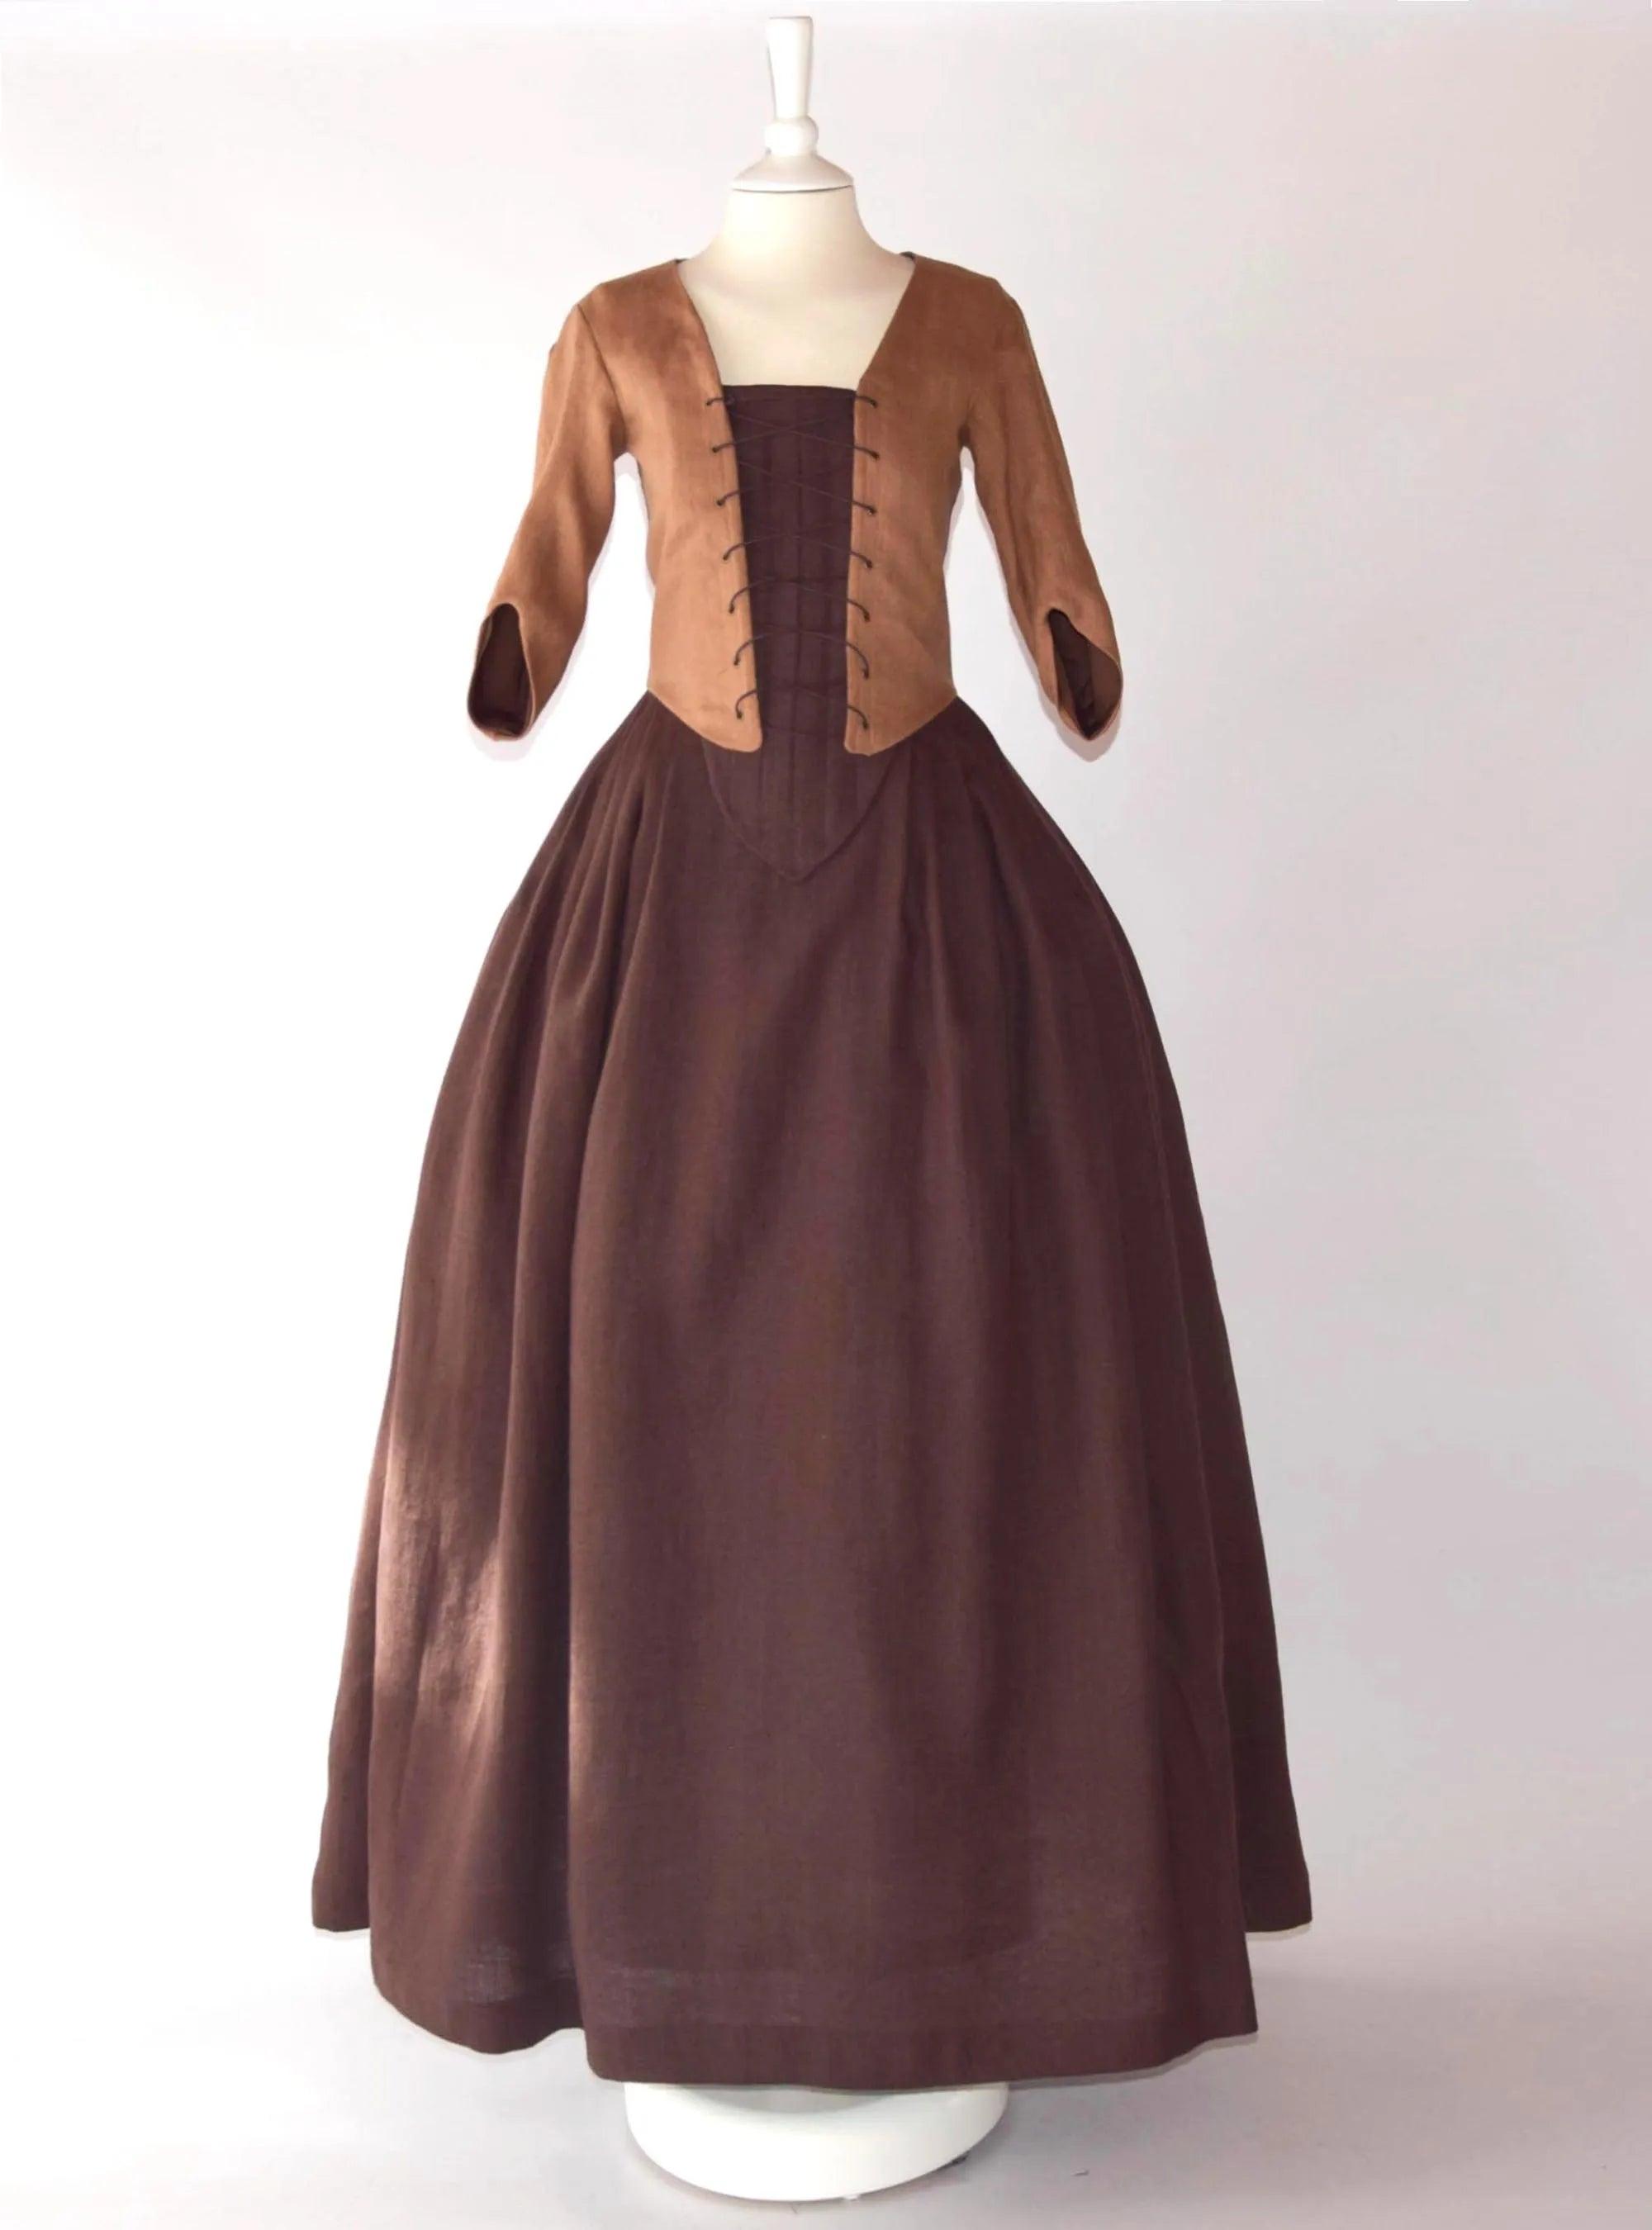 Historical Costume in Toffee & Chocolate Linen - Atelier Serraspina